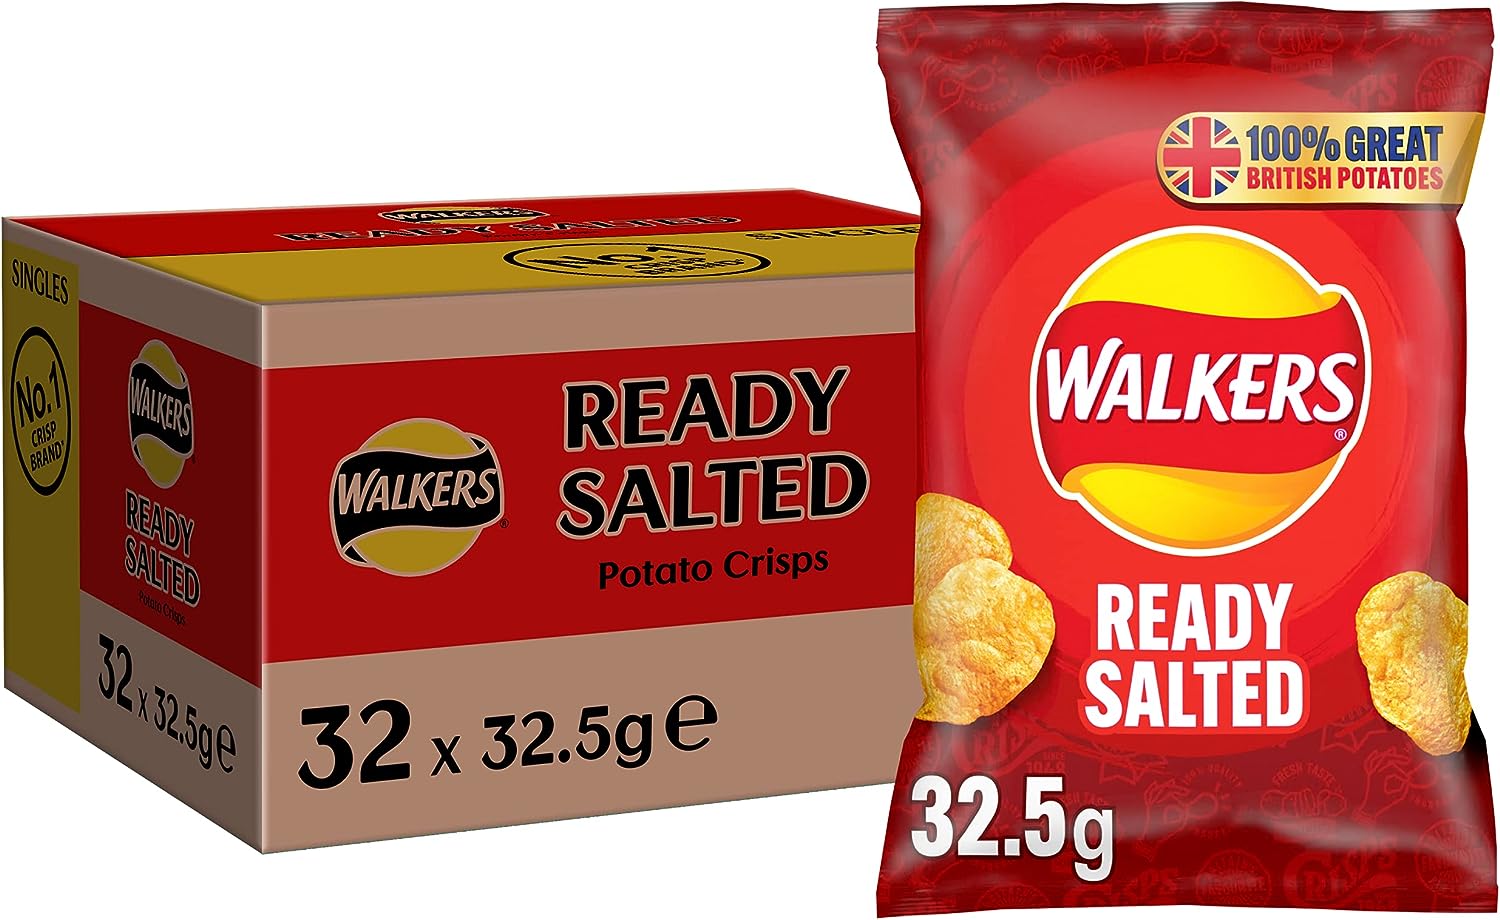 Walkers Ready Salted Crisps - 32.5g - Pack of 32